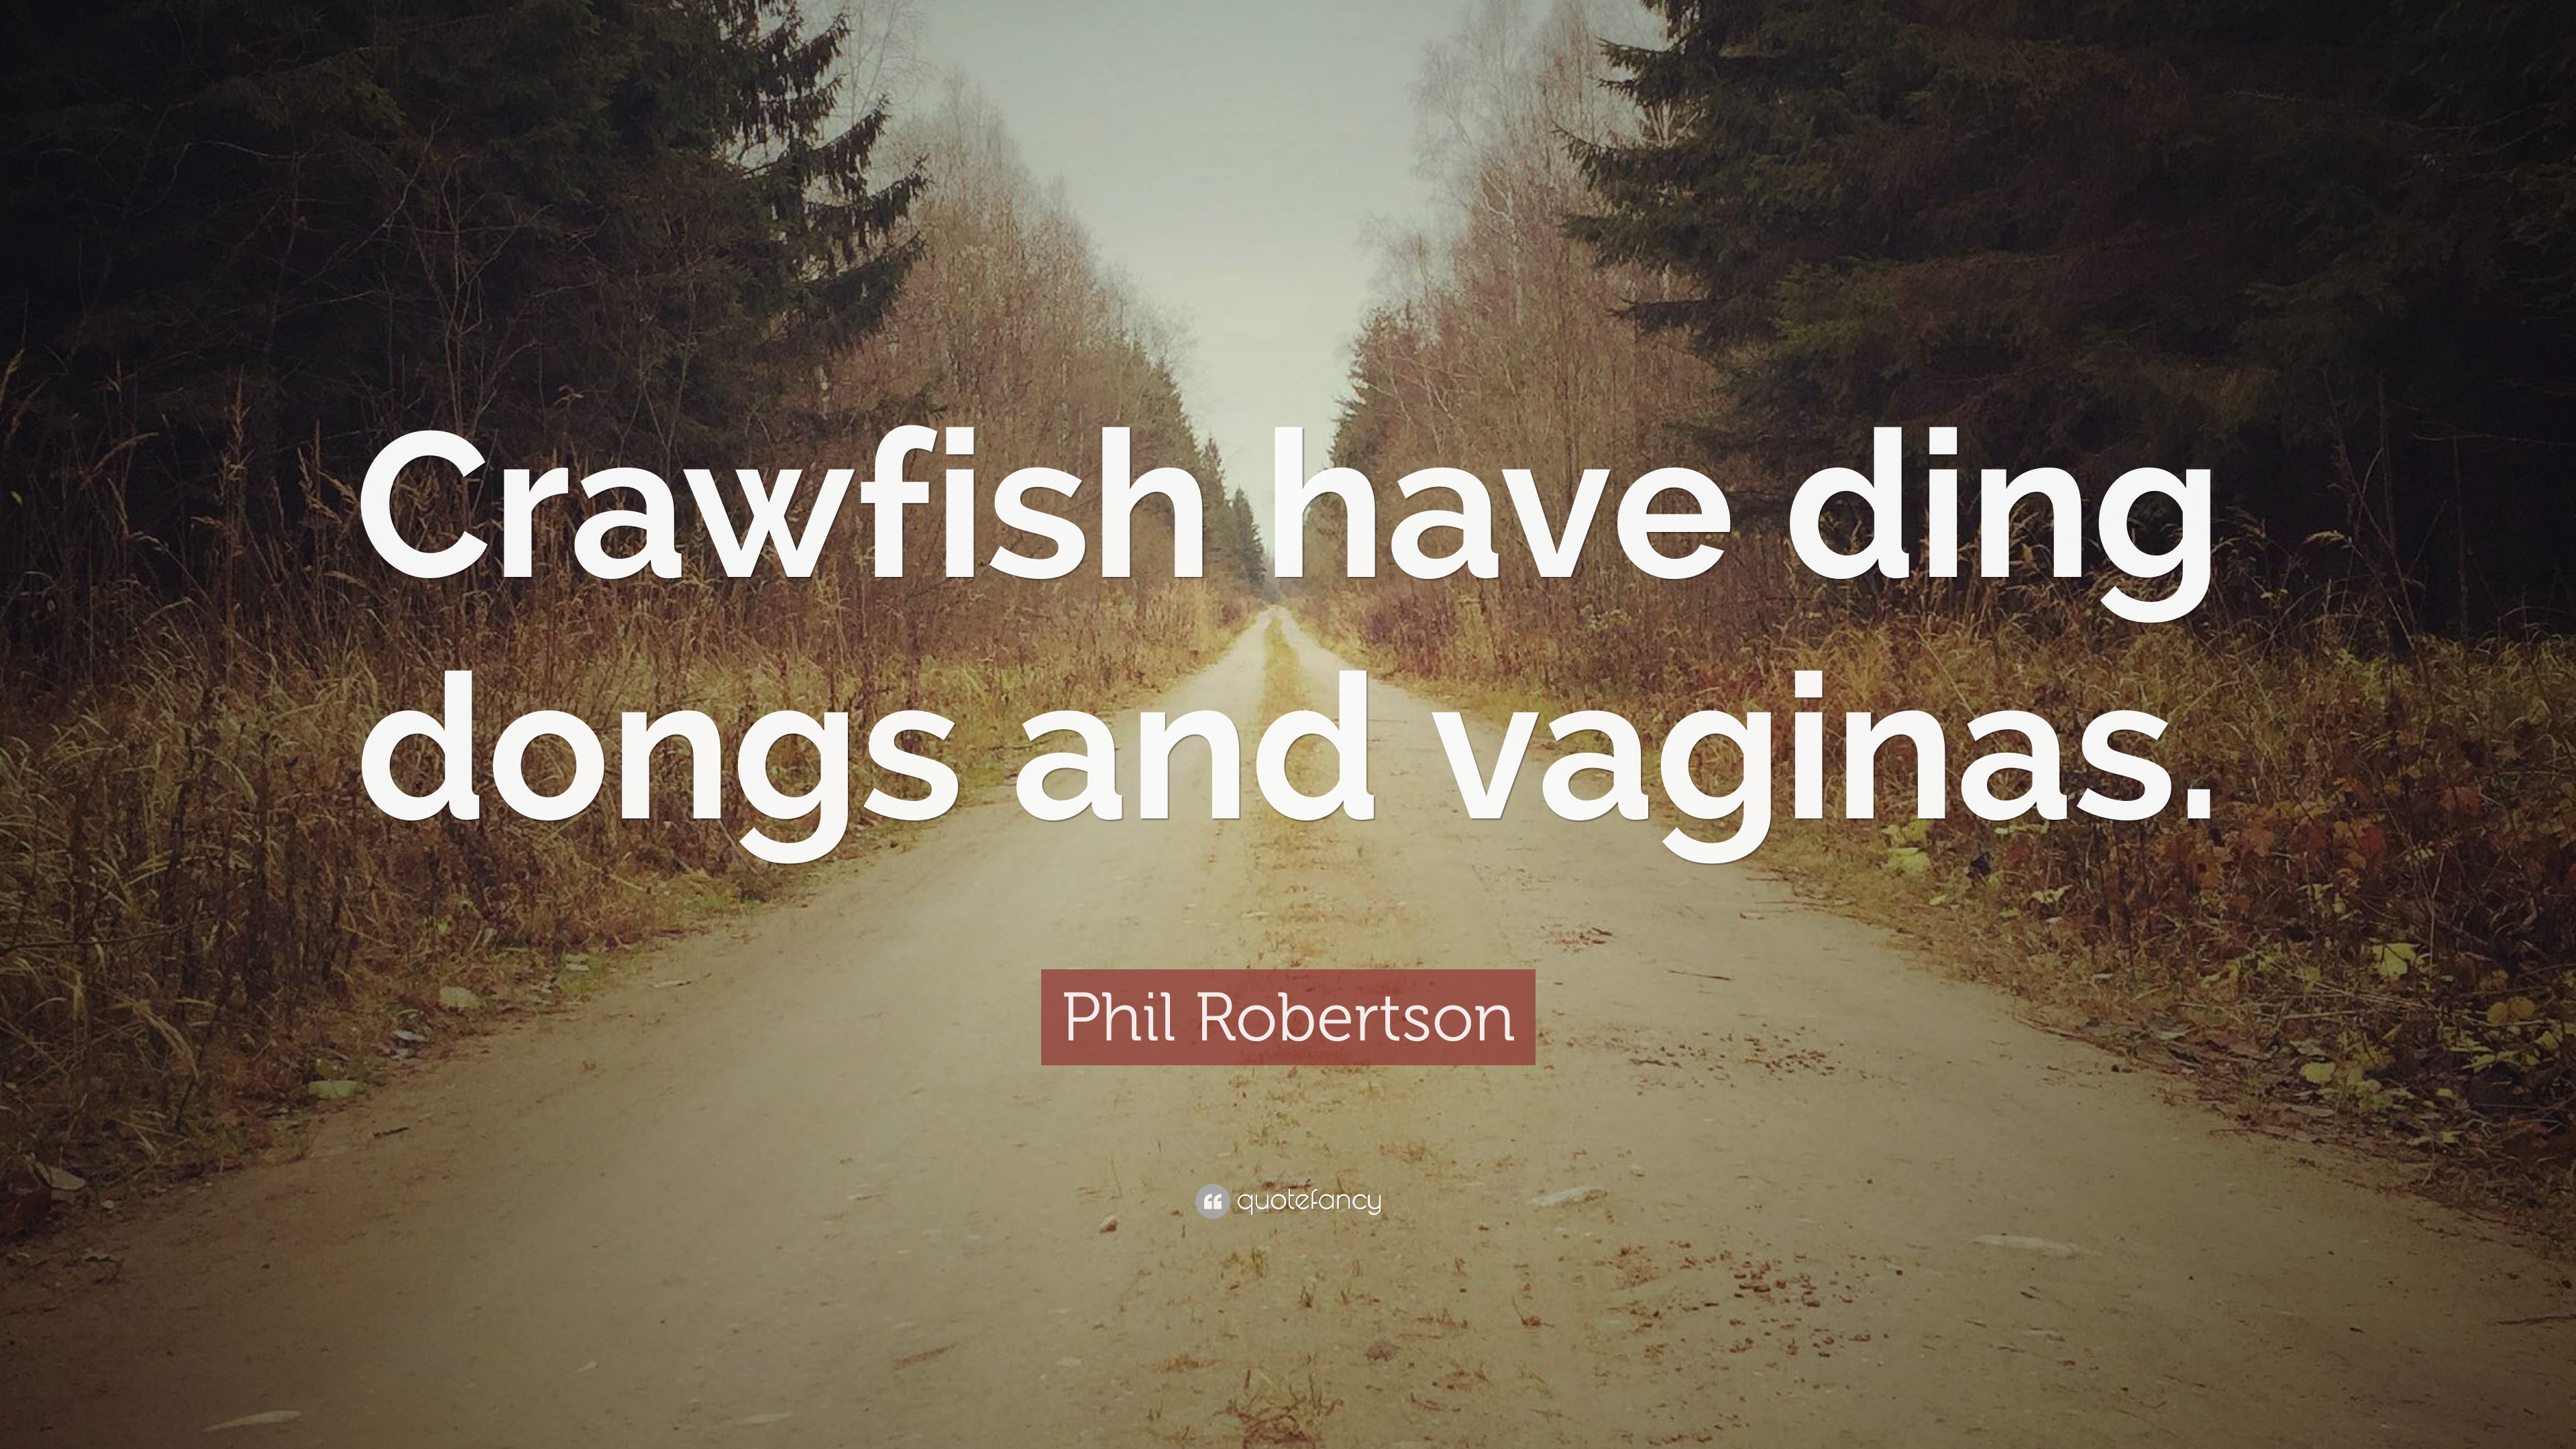 Phil Robertson Quote: “Crawfish have ding dongs and vaginas.” 7